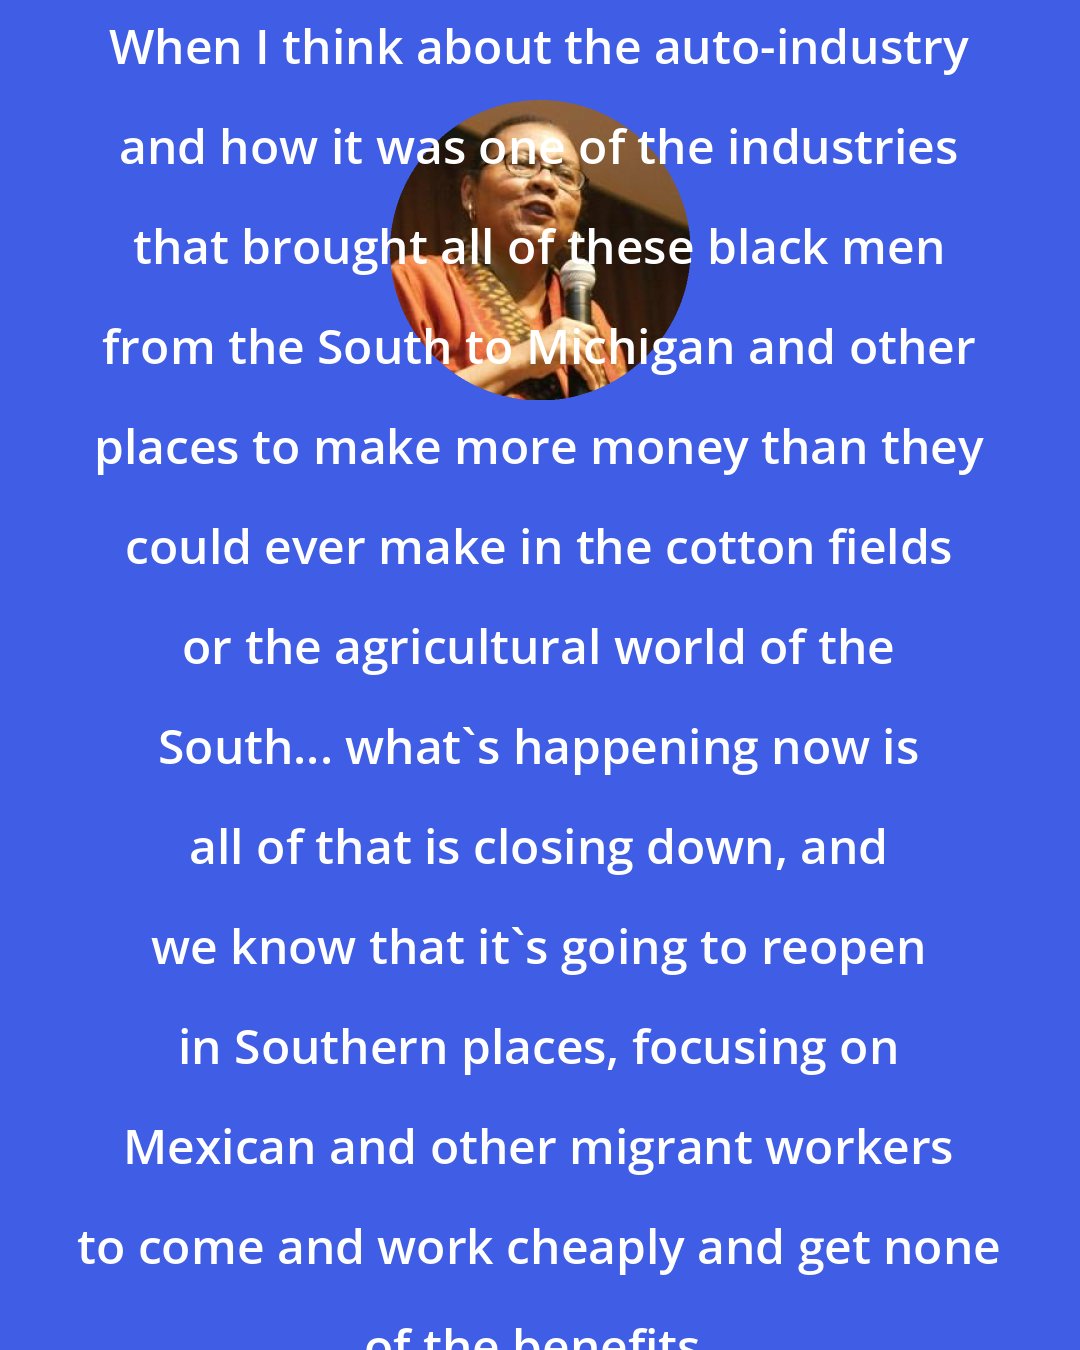 Bell Hooks: When I think about the auto-industry and how it was one of the industries that brought all of these black men from the South to Michigan and other places to make more money than they could ever make in the cotton fields or the agricultural world of the South... what's happening now is all of that is closing down, and we know that it's going to reopen in Southern places, focusing on Mexican and other migrant workers to come and work cheaply and get none of the benefits.